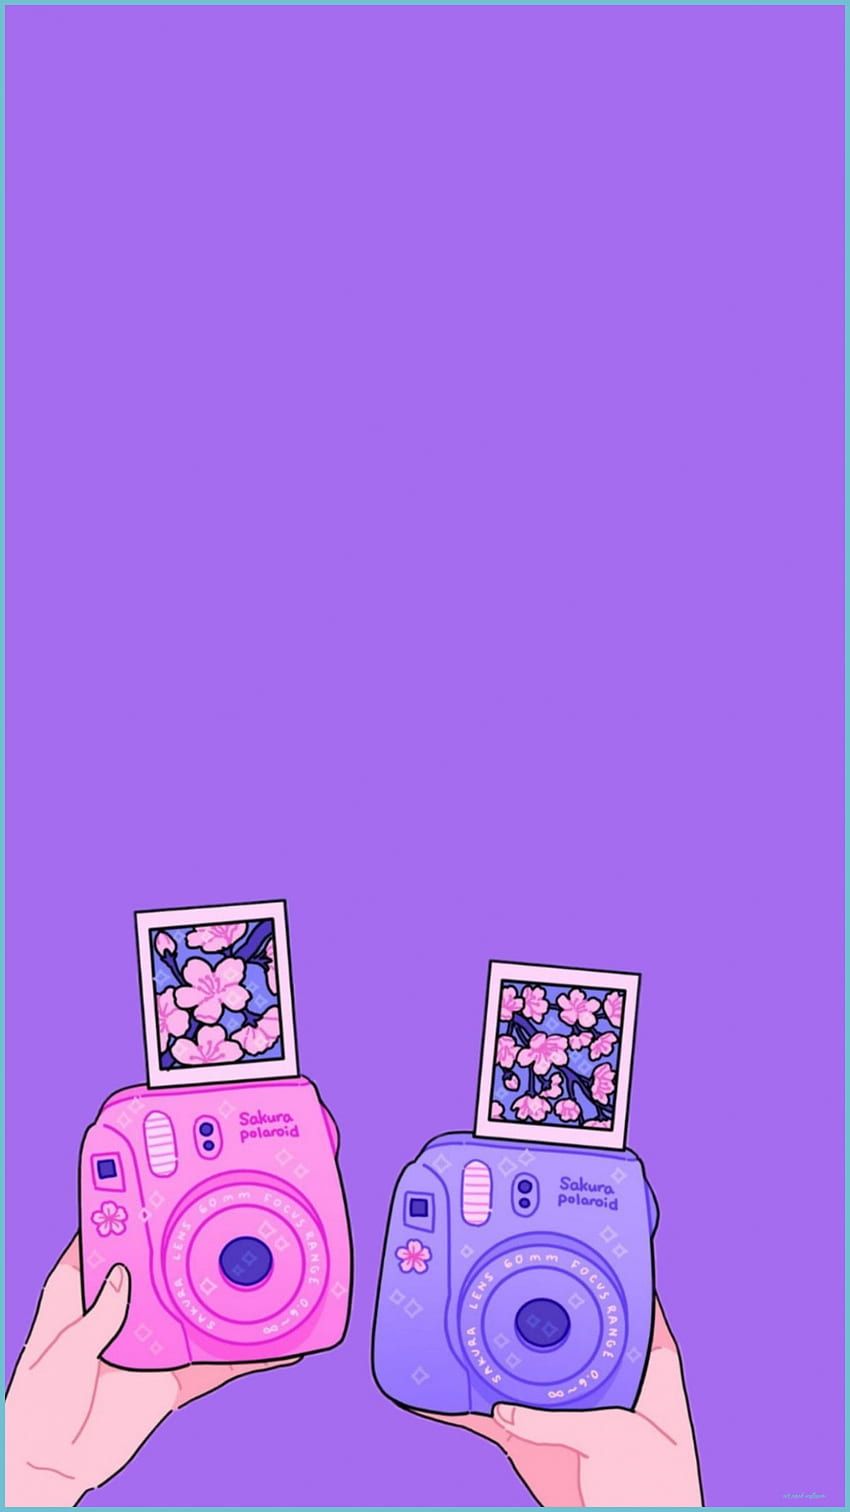 Aesthetic purple and pink polaroid wallpaper for phone background. - Violet